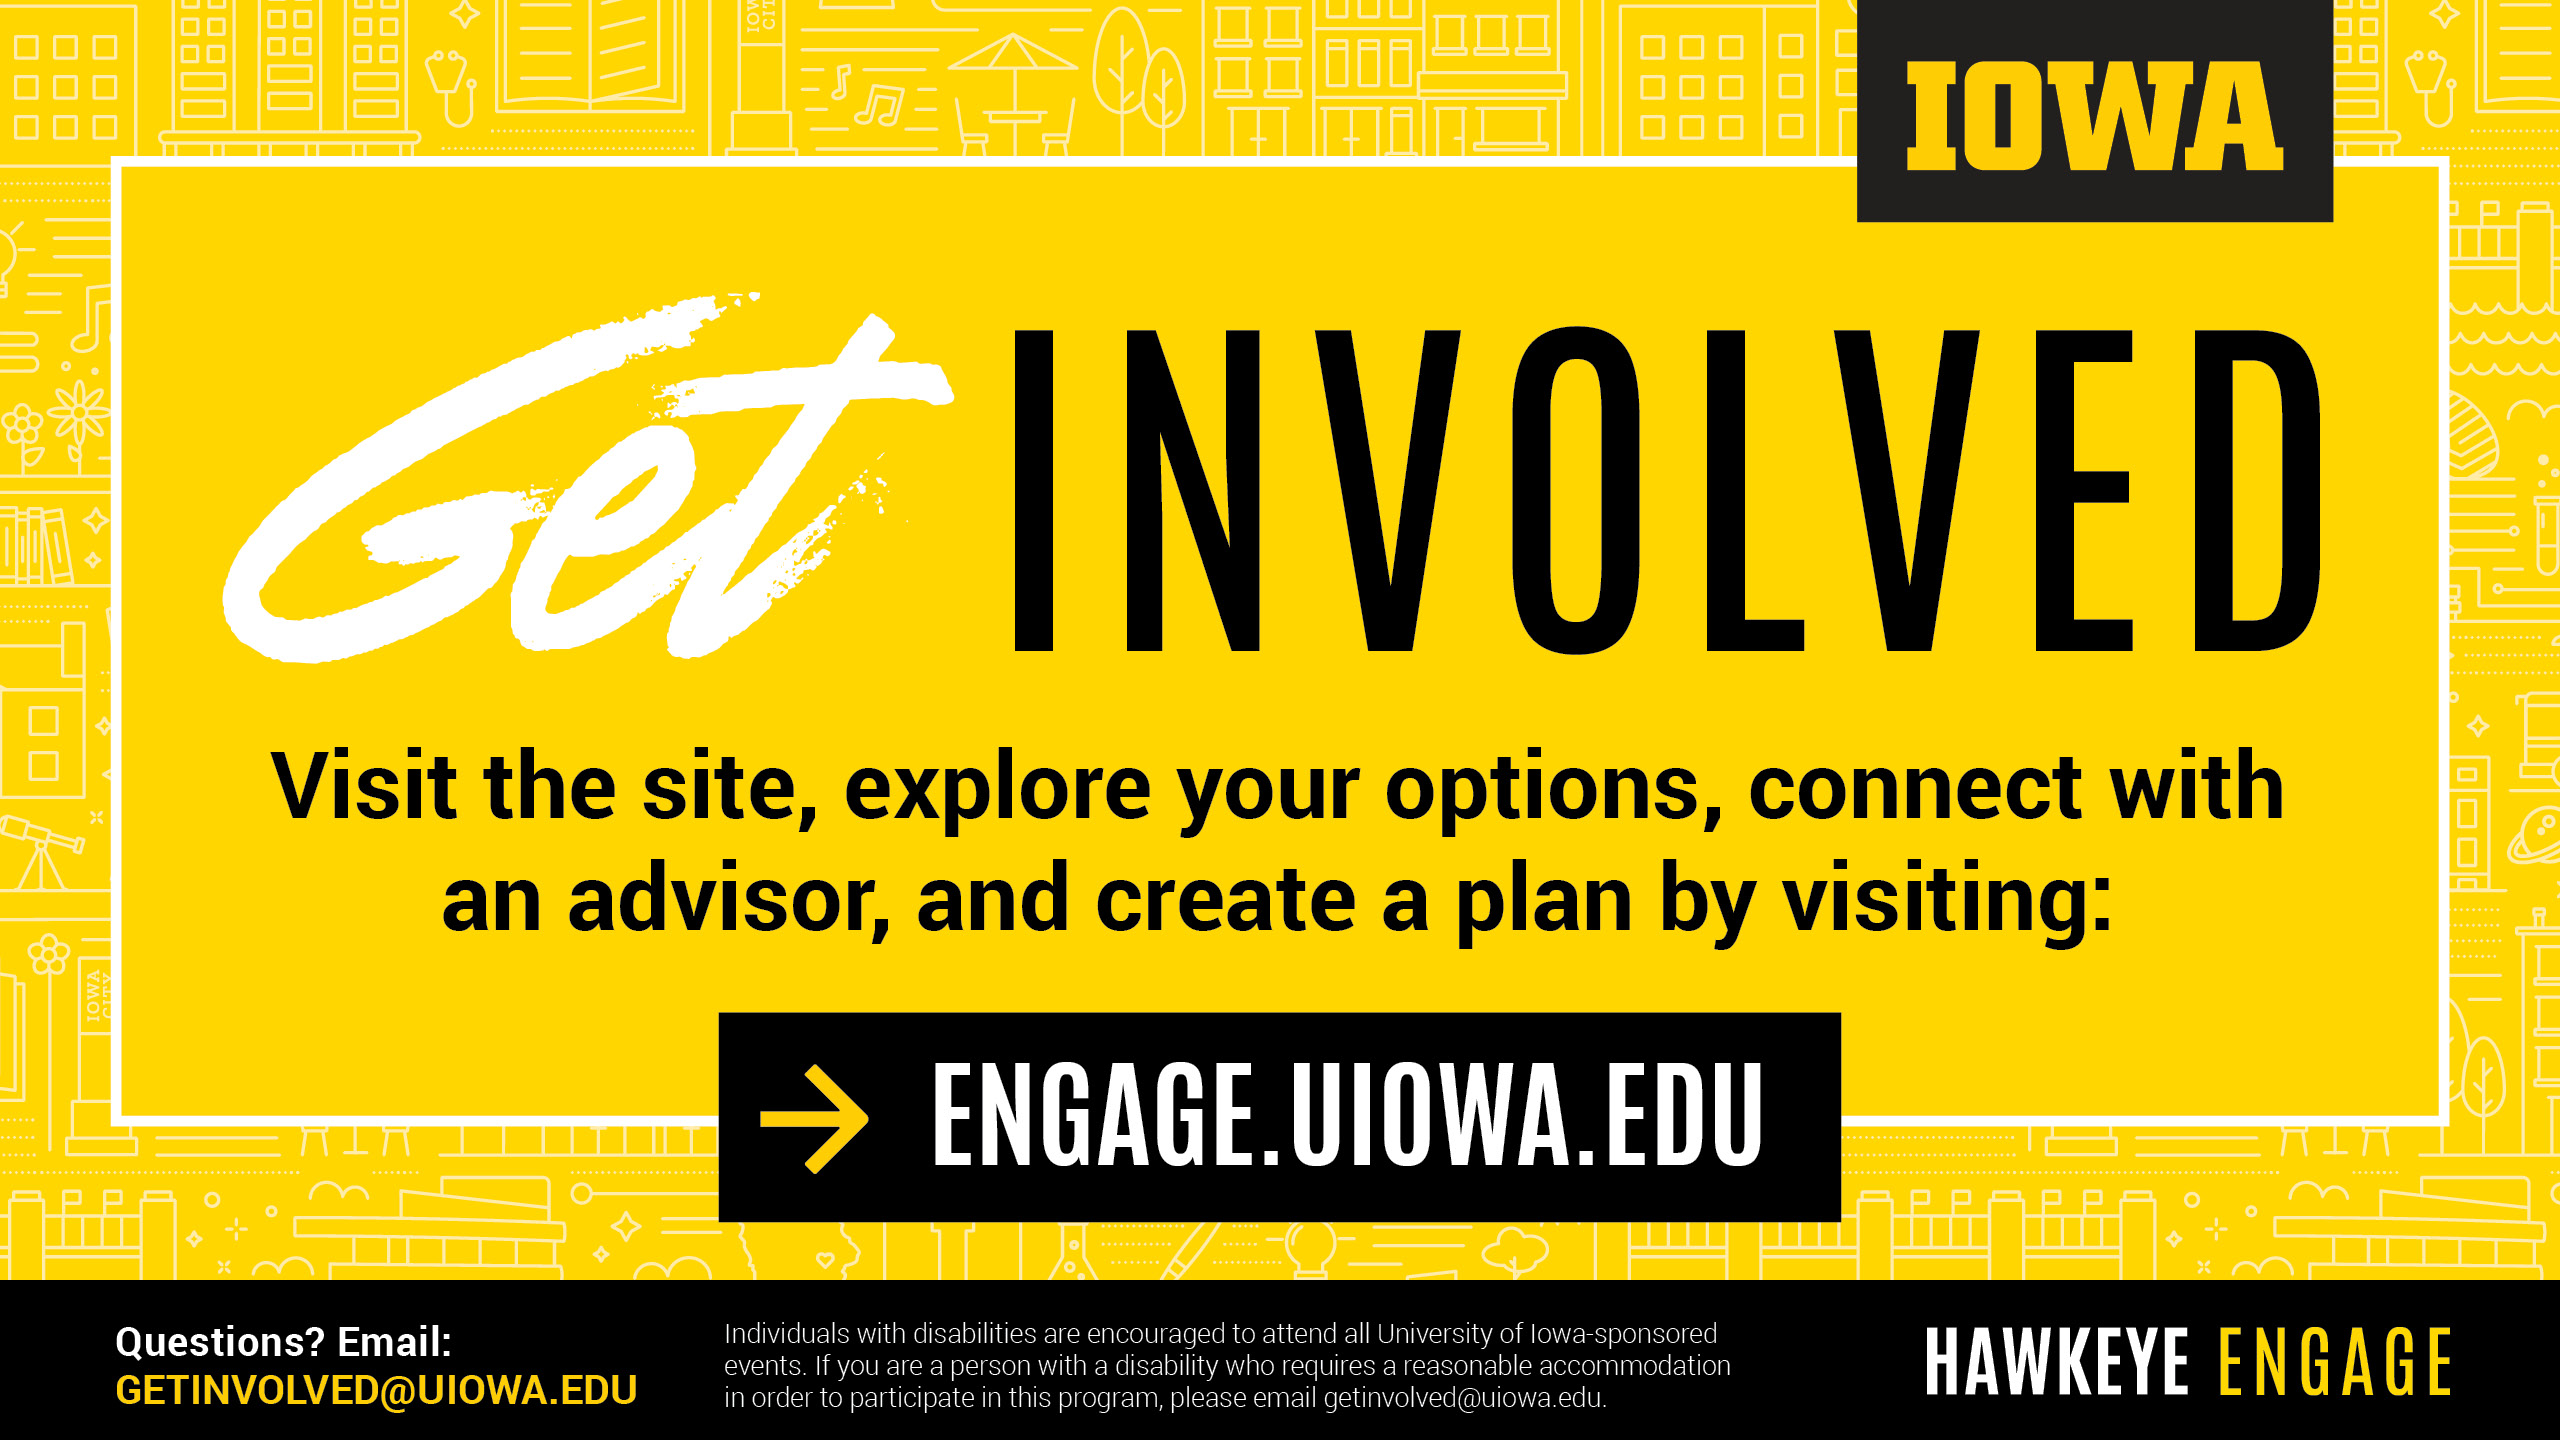 Get Involved. Visit the site, explore your options, connect with an advisor, and create a plan by visiting: engage.uiowa.edu. Hawkeye Engage.